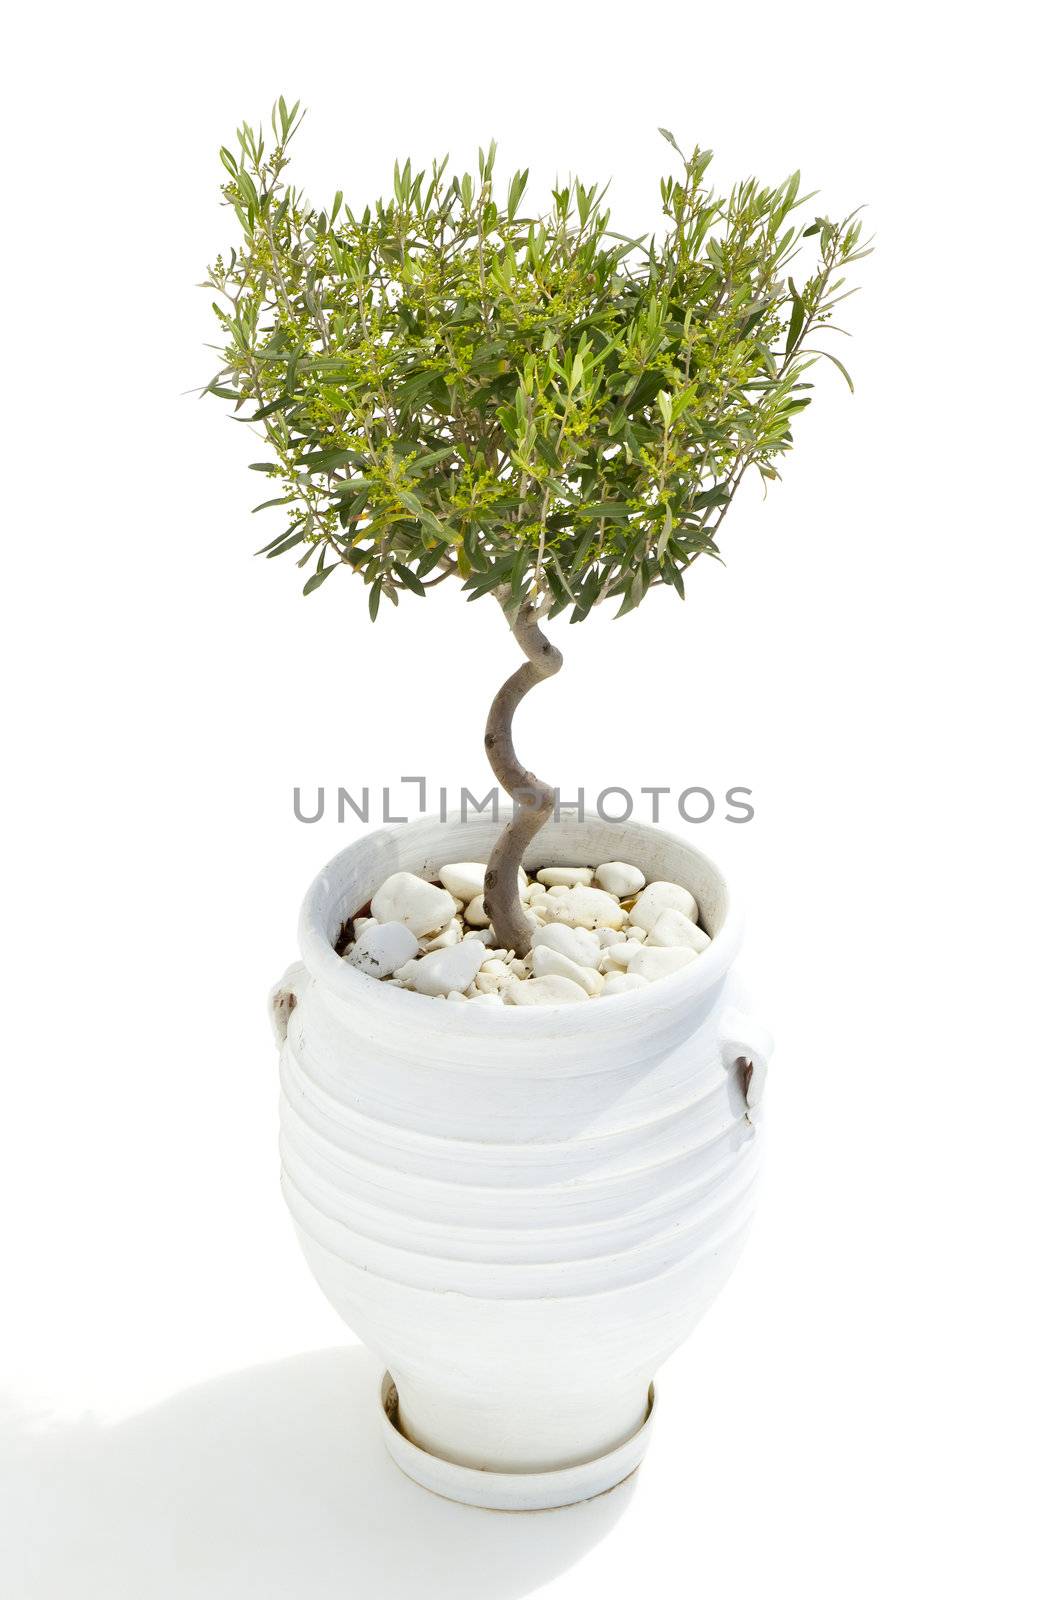 An image of an olive tree on white background